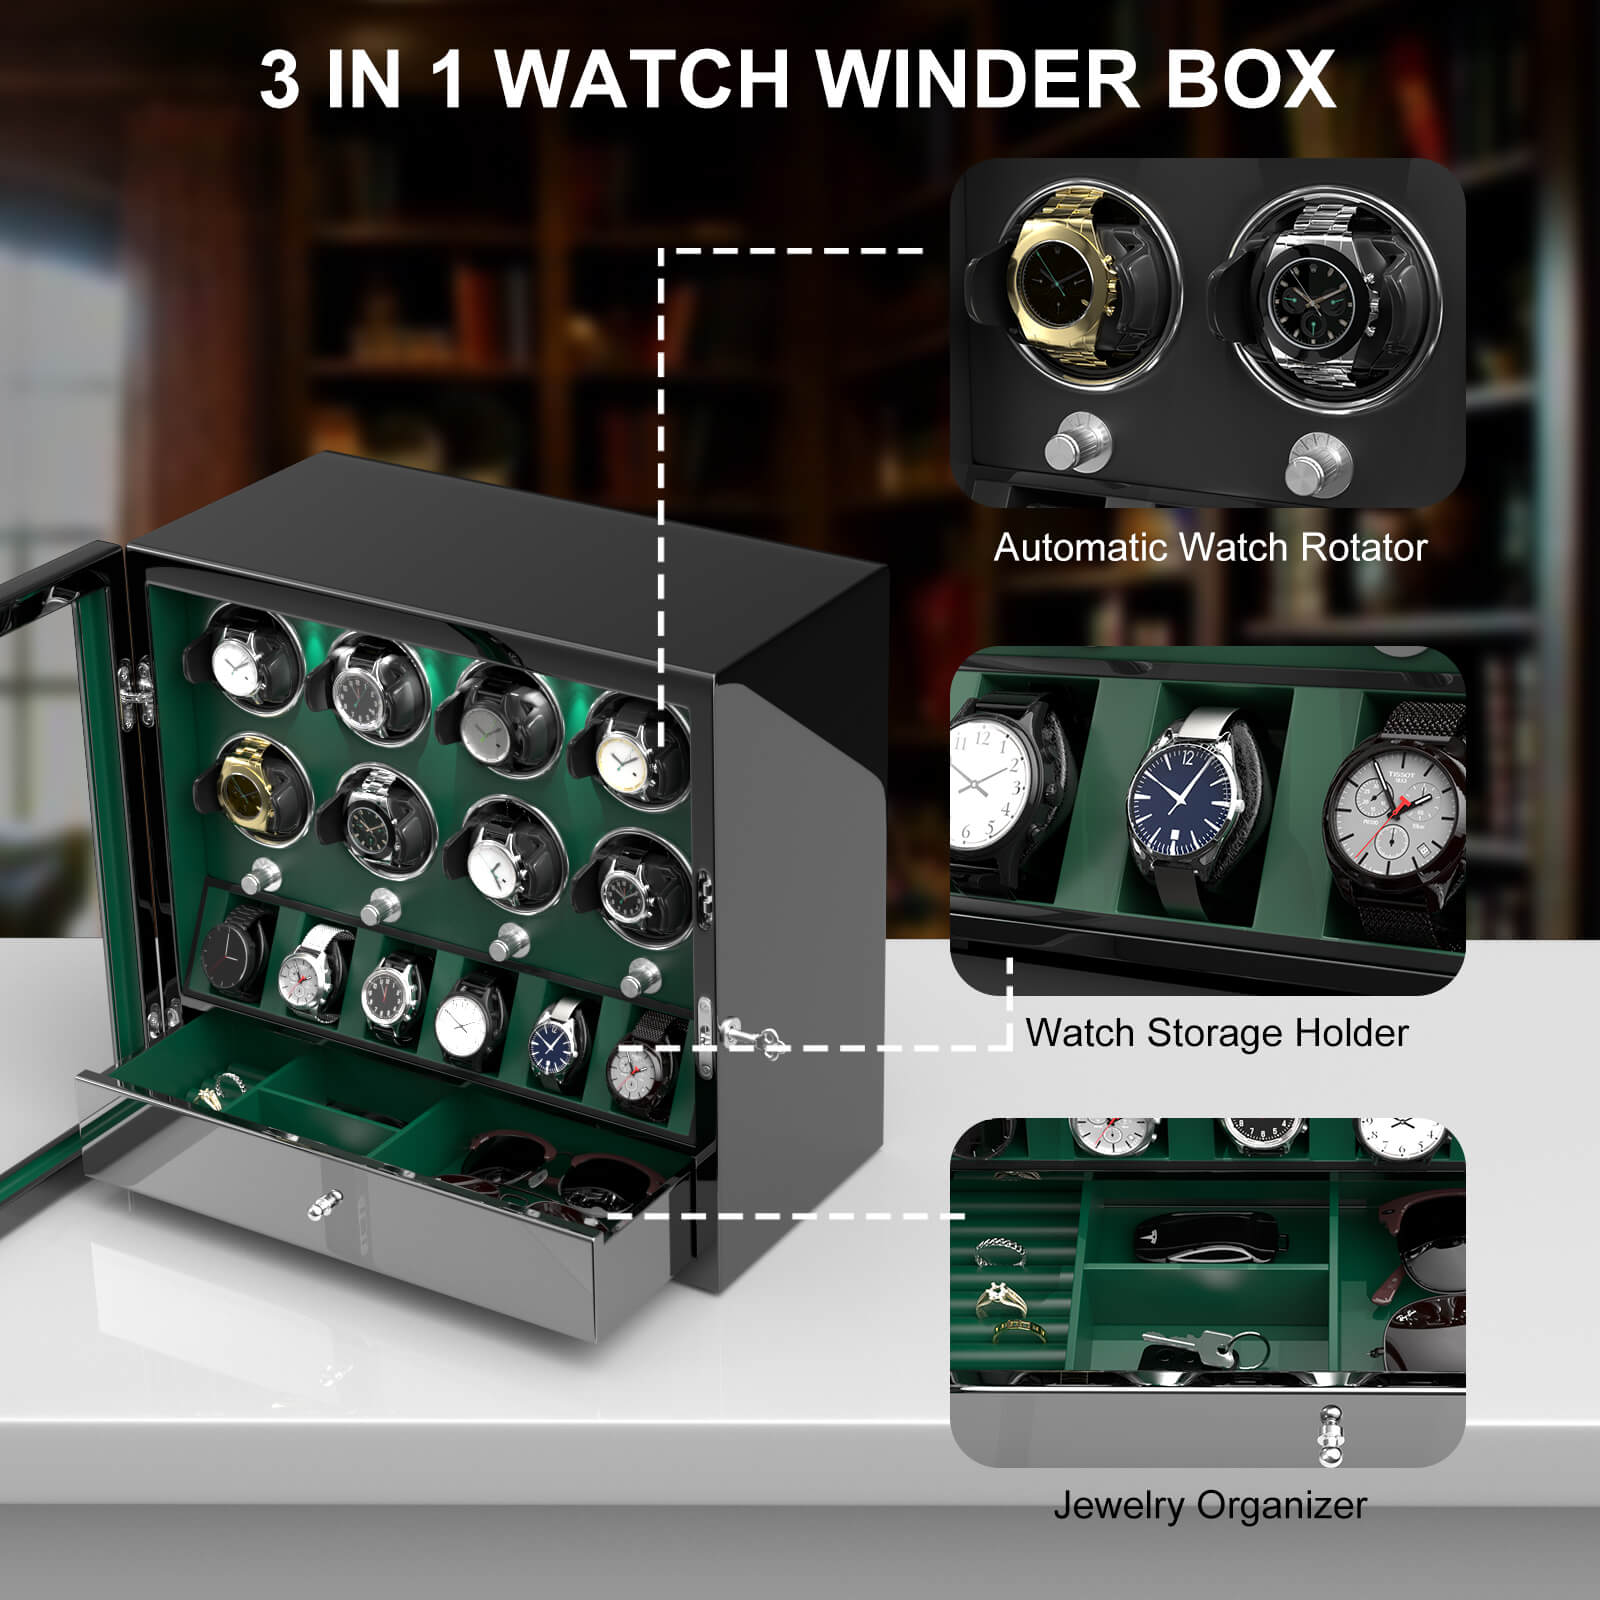 Compact 8 Watch Winders with 6 Watches Organizer Storage Large Space Case - Green